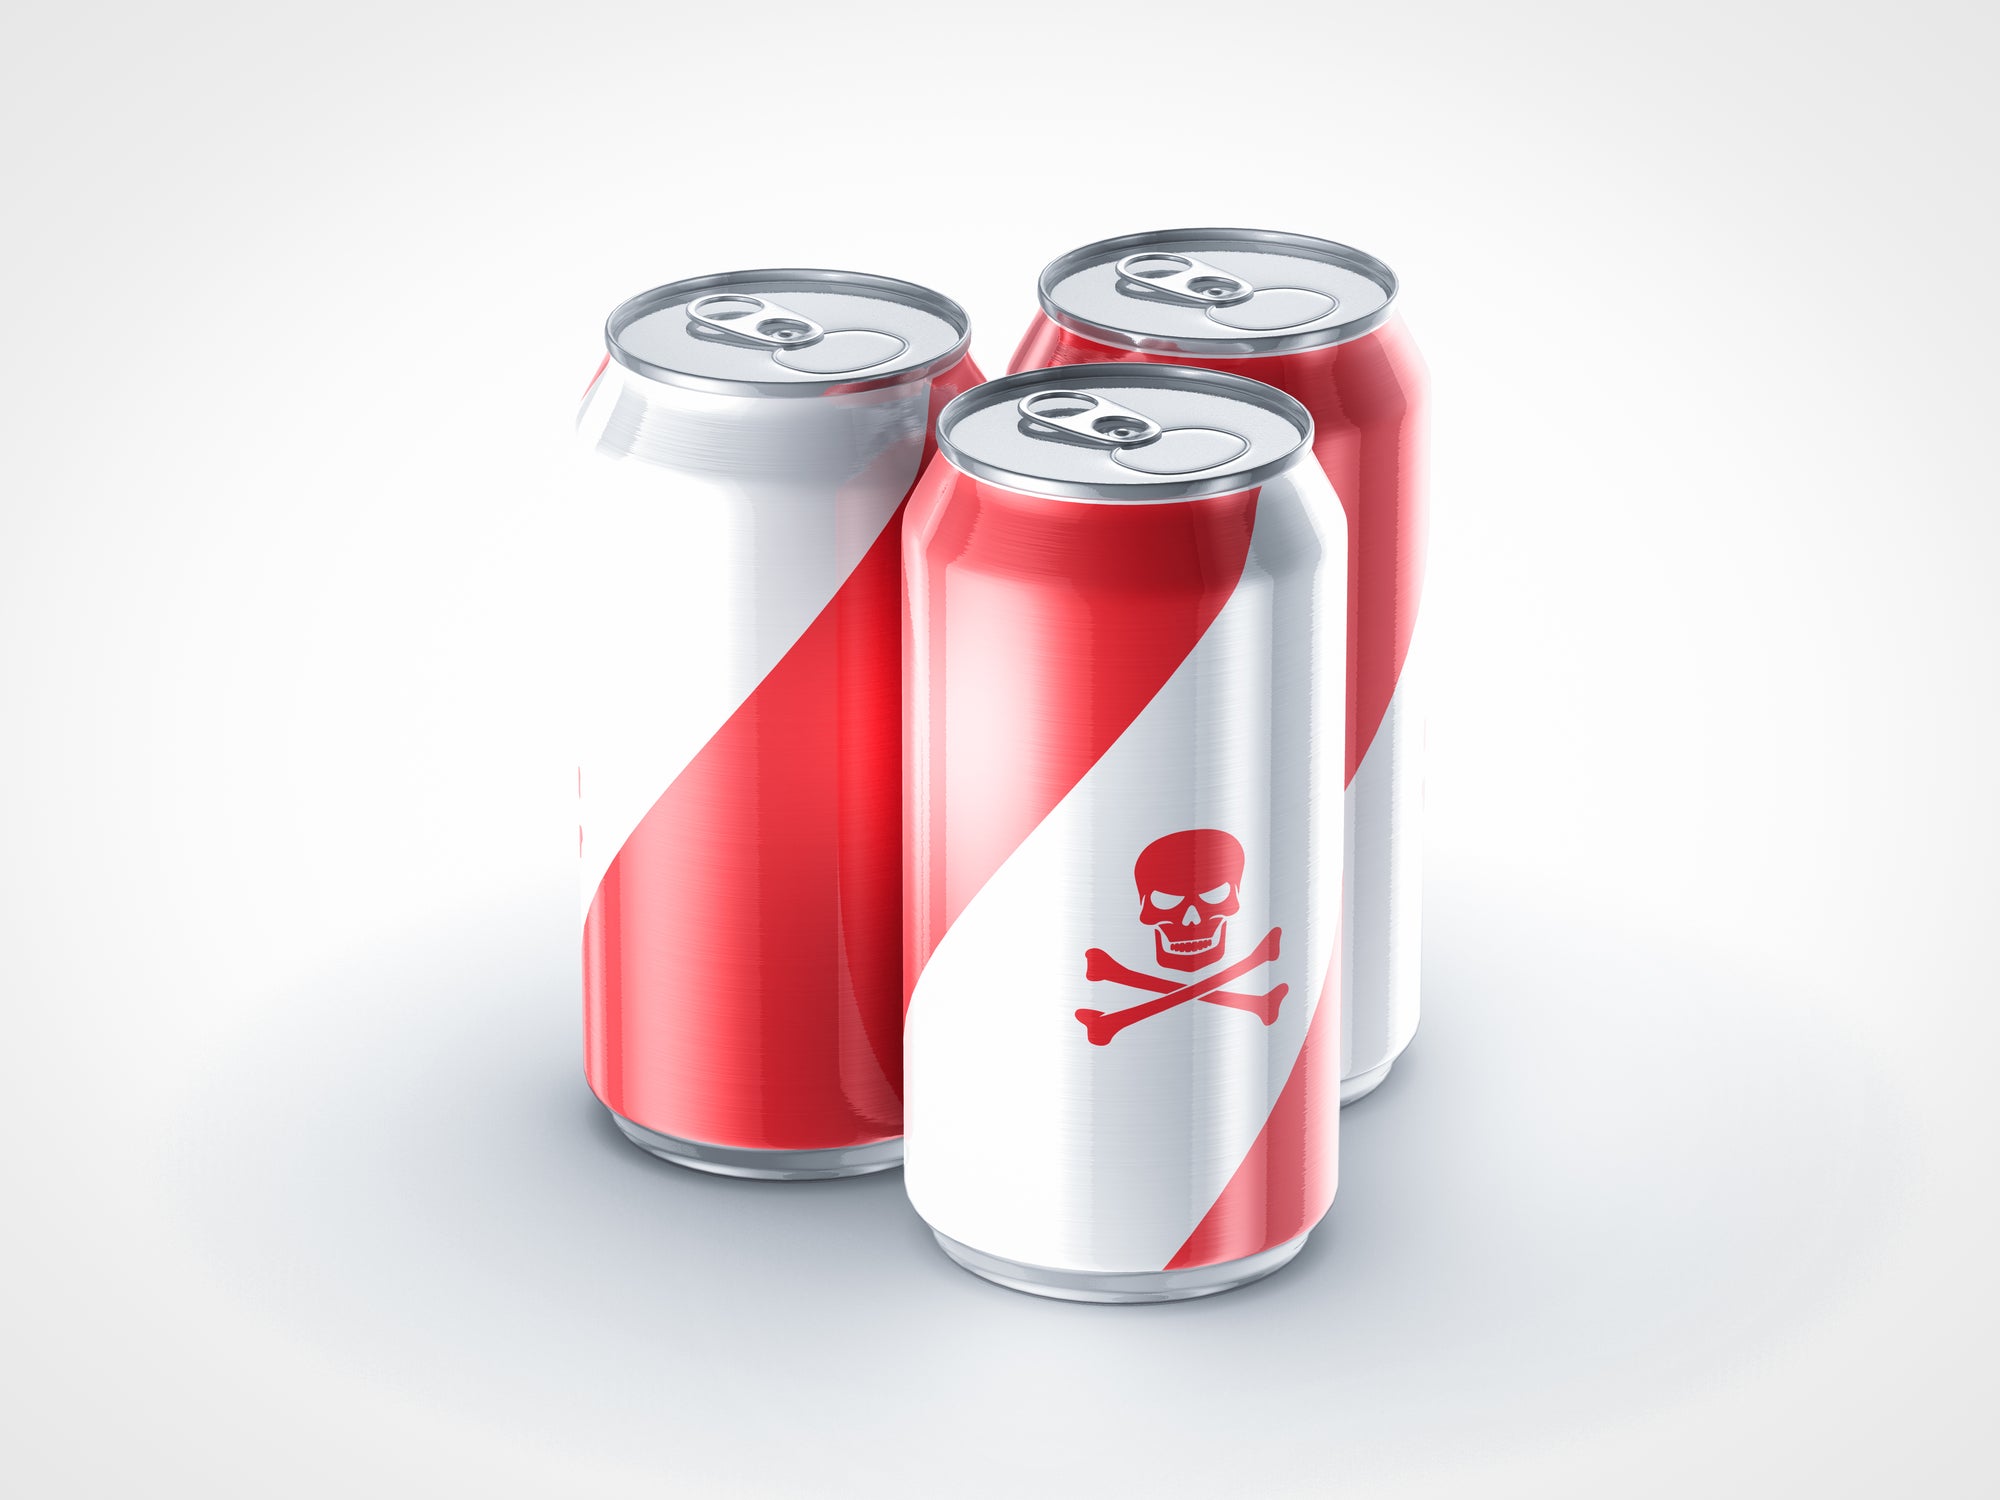 Cans Of Soda With Skulls On Them